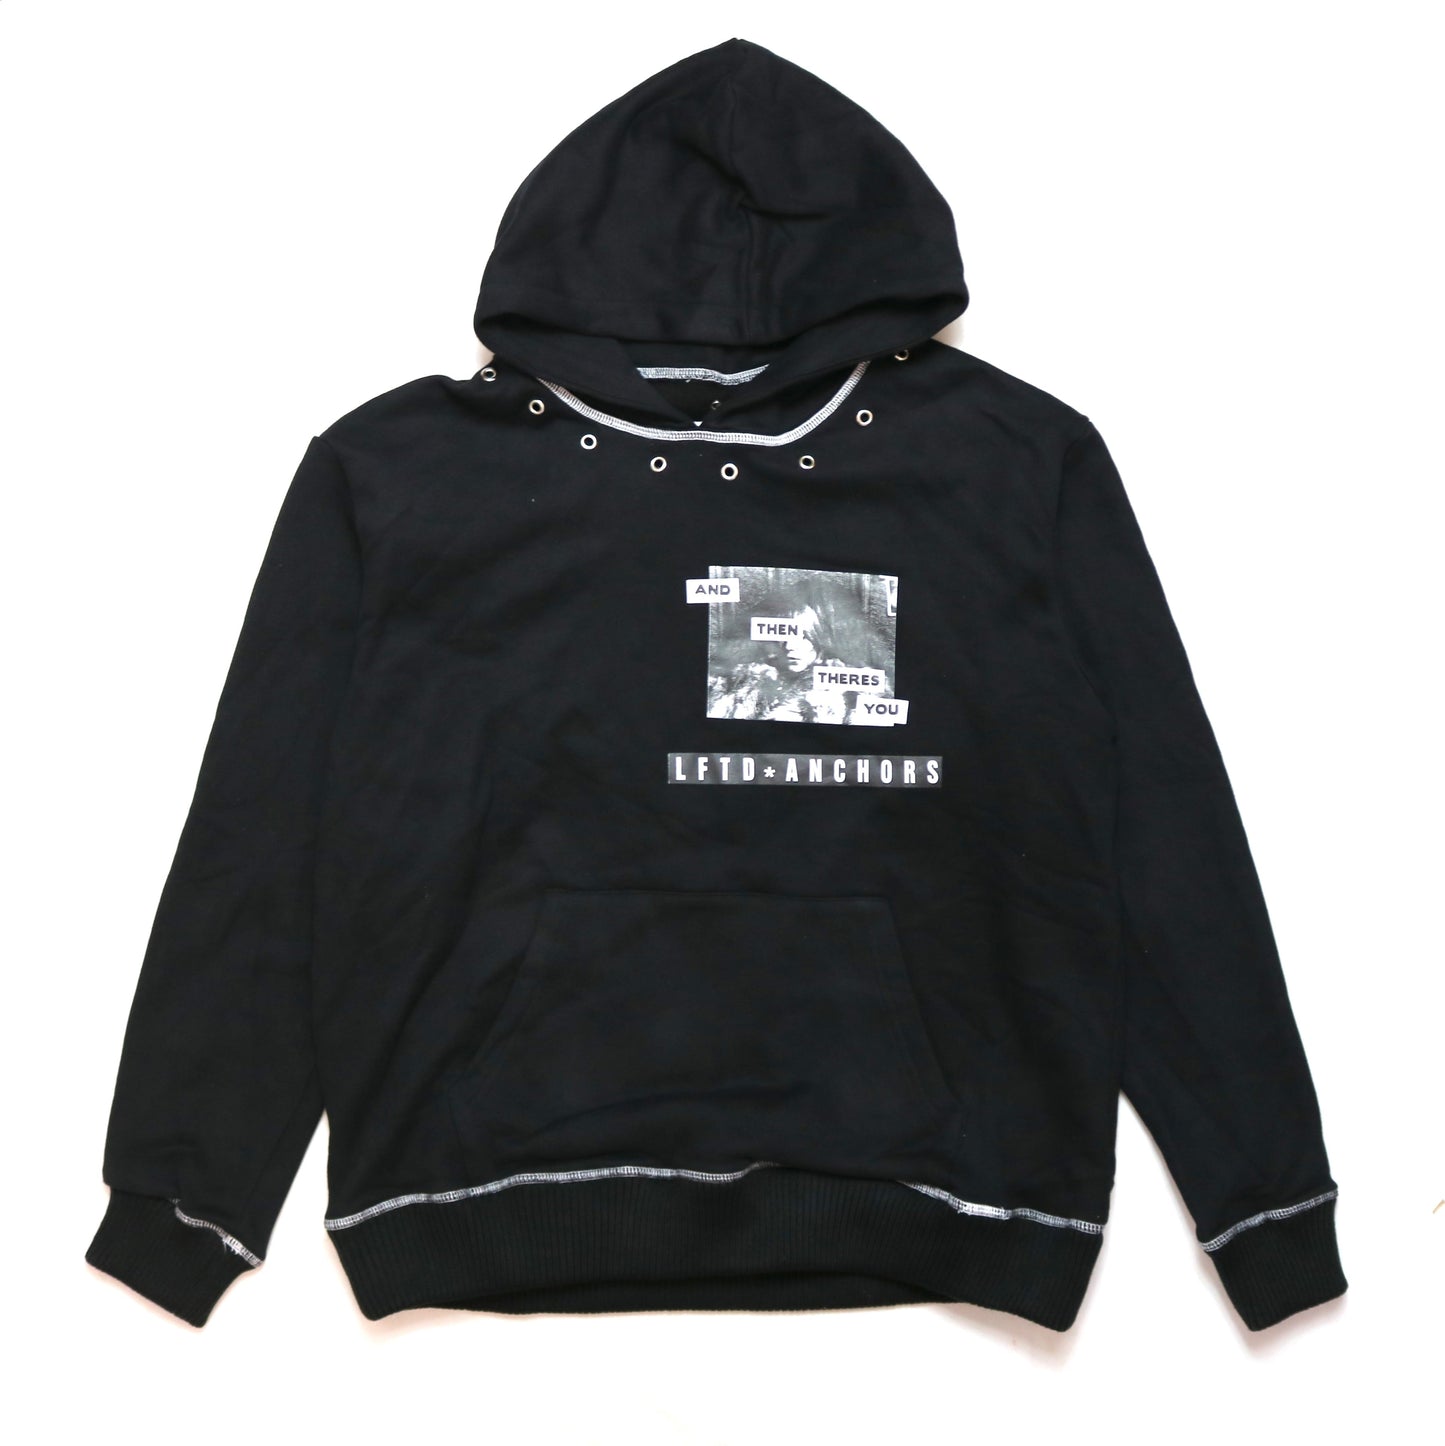 LIFTED ANCHORS/ELECTRA HOODIE